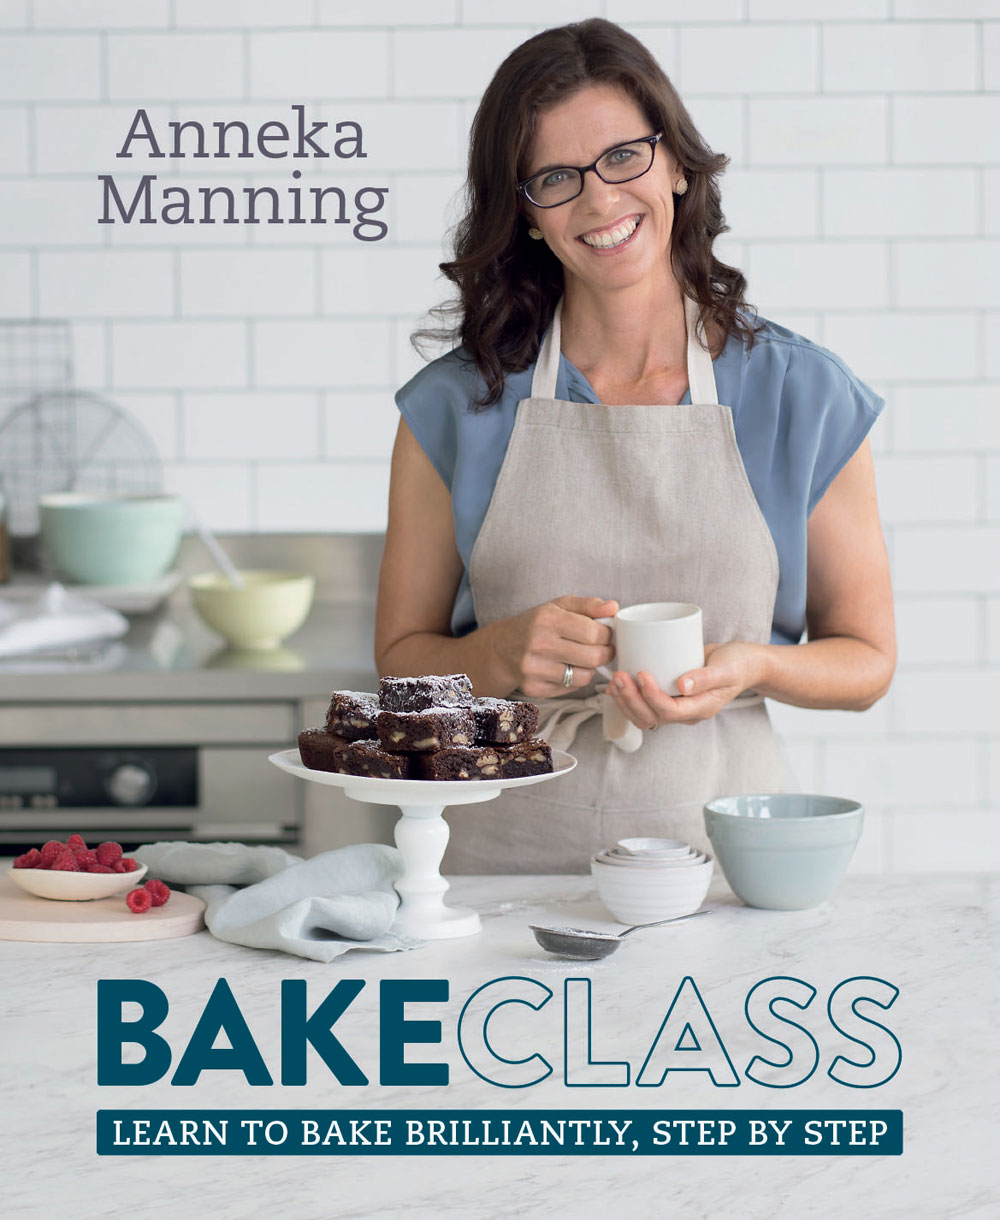 Recipe and image from BakeClass by Anneka Manning (Murdoch Books).